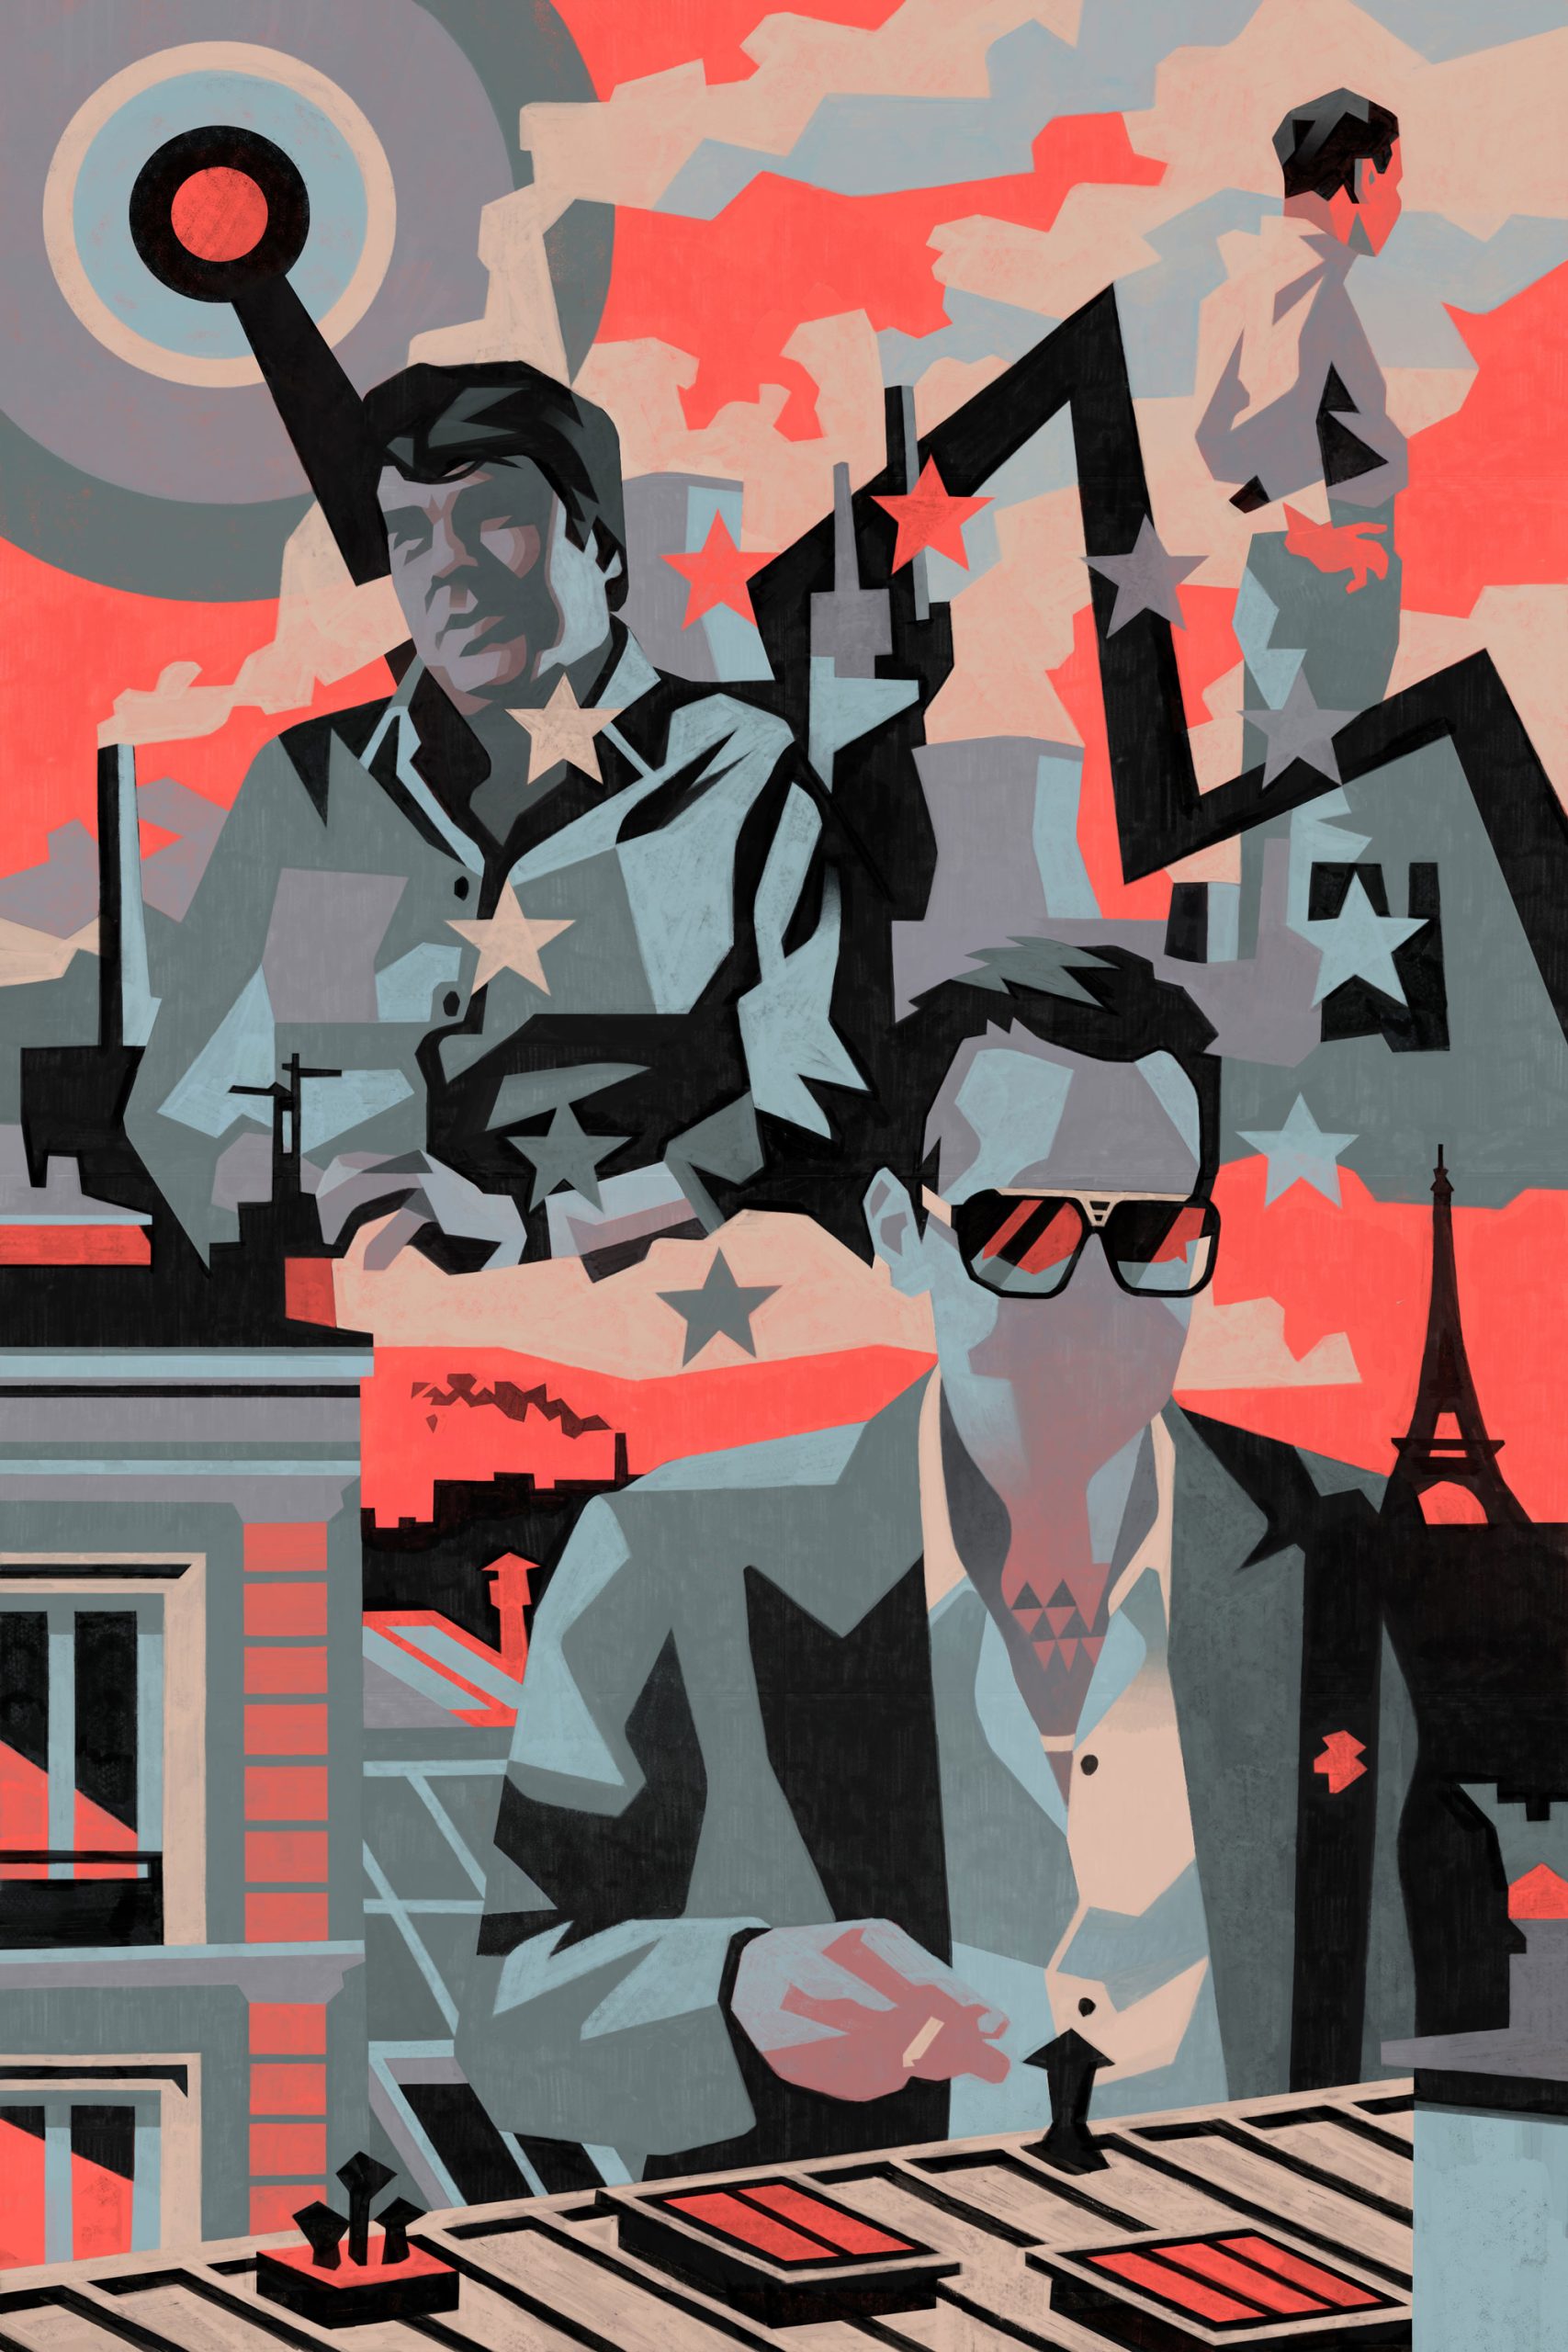 vibrant pink, peach, and black illustration of two men, one with sunglasses, with an Eiffel Tower in the background